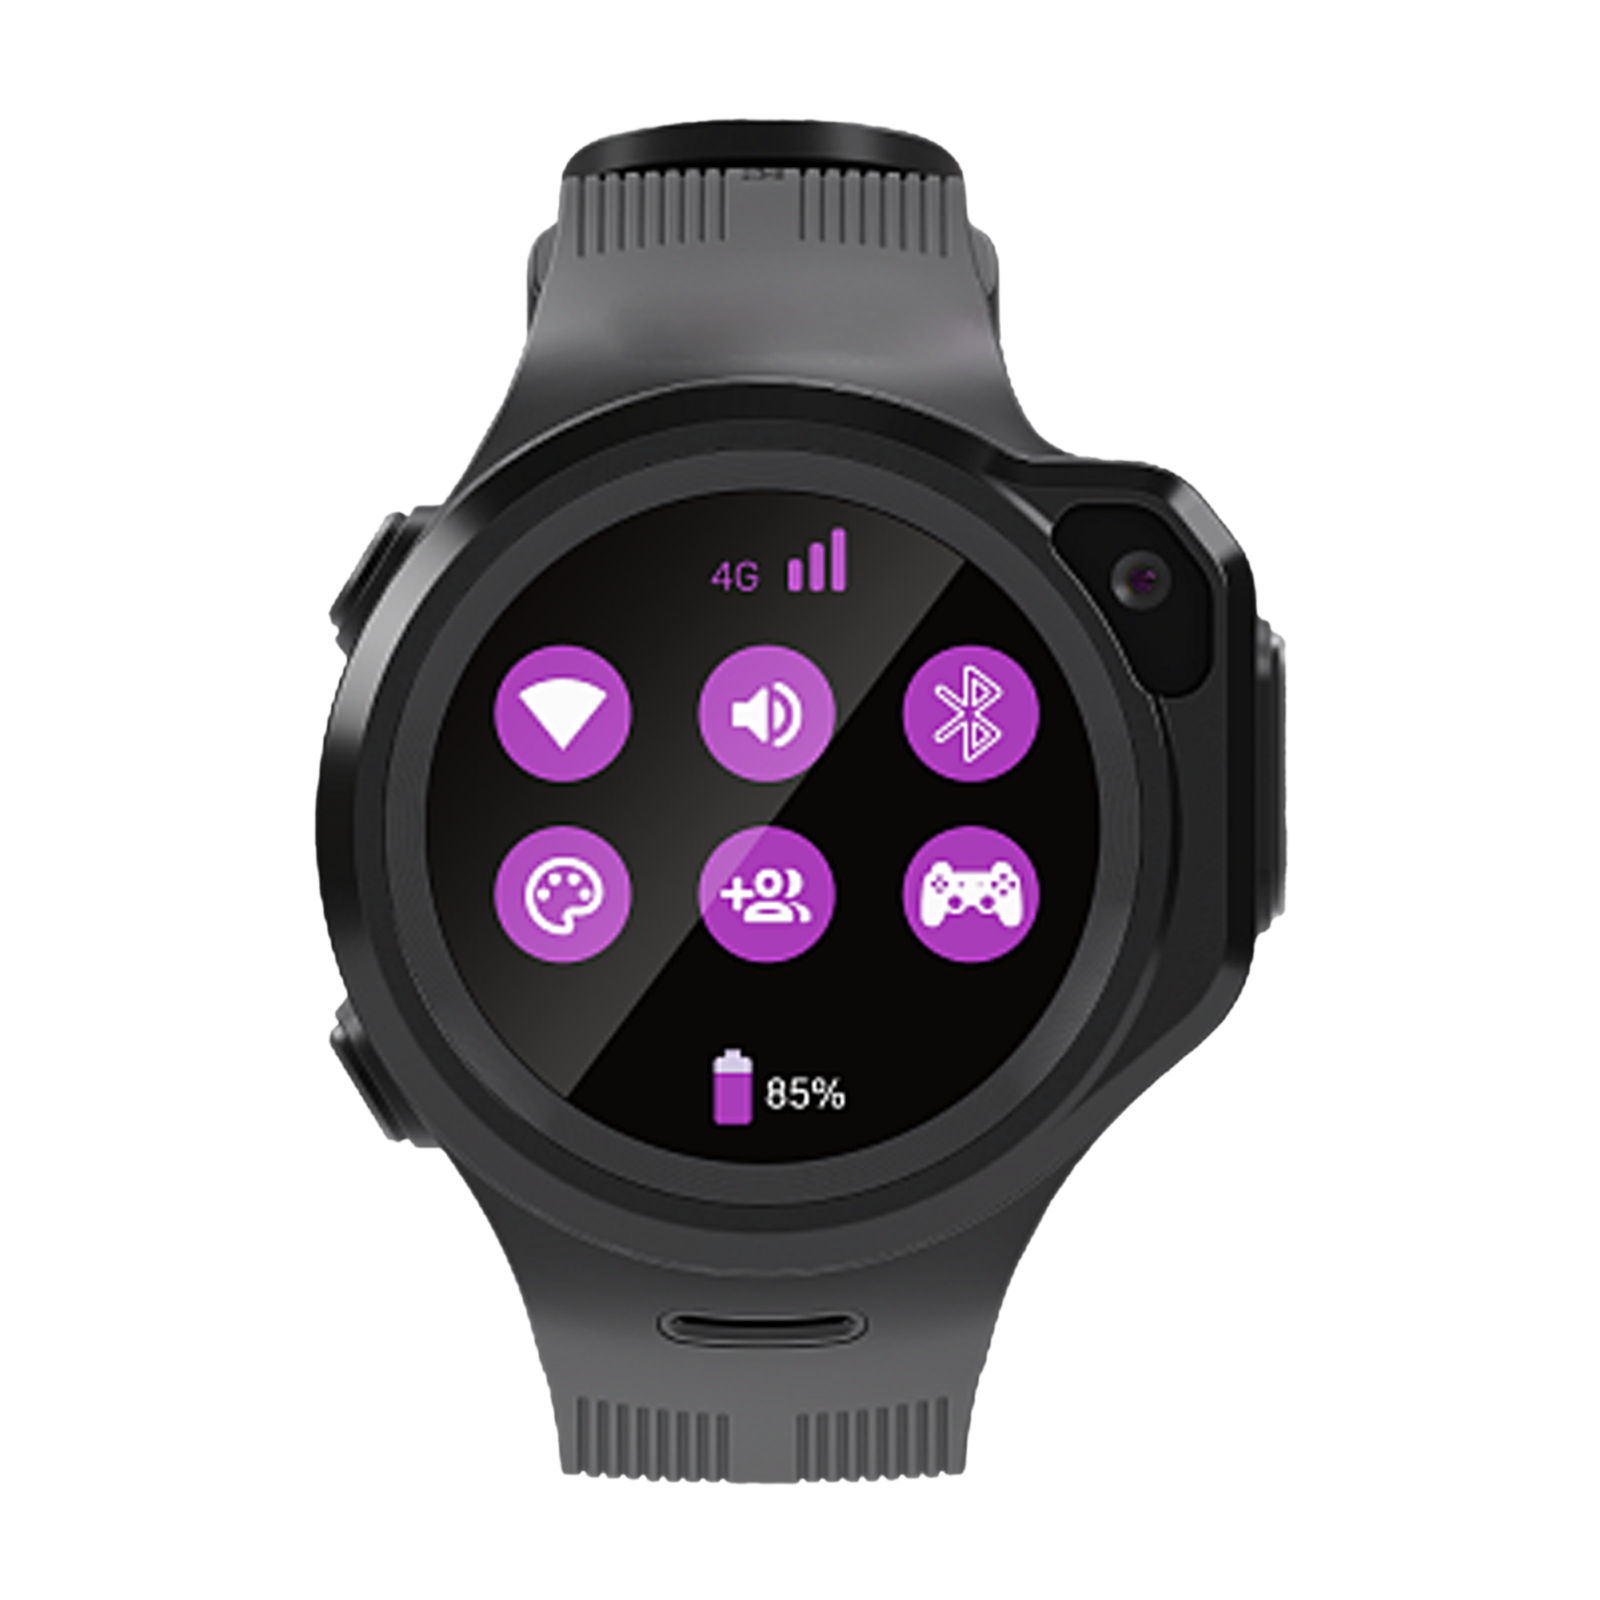 WATCHOUT Next-Gen Smartwatch with GPS (33.02mm Display, Water Resistant, Space Grey Strap)